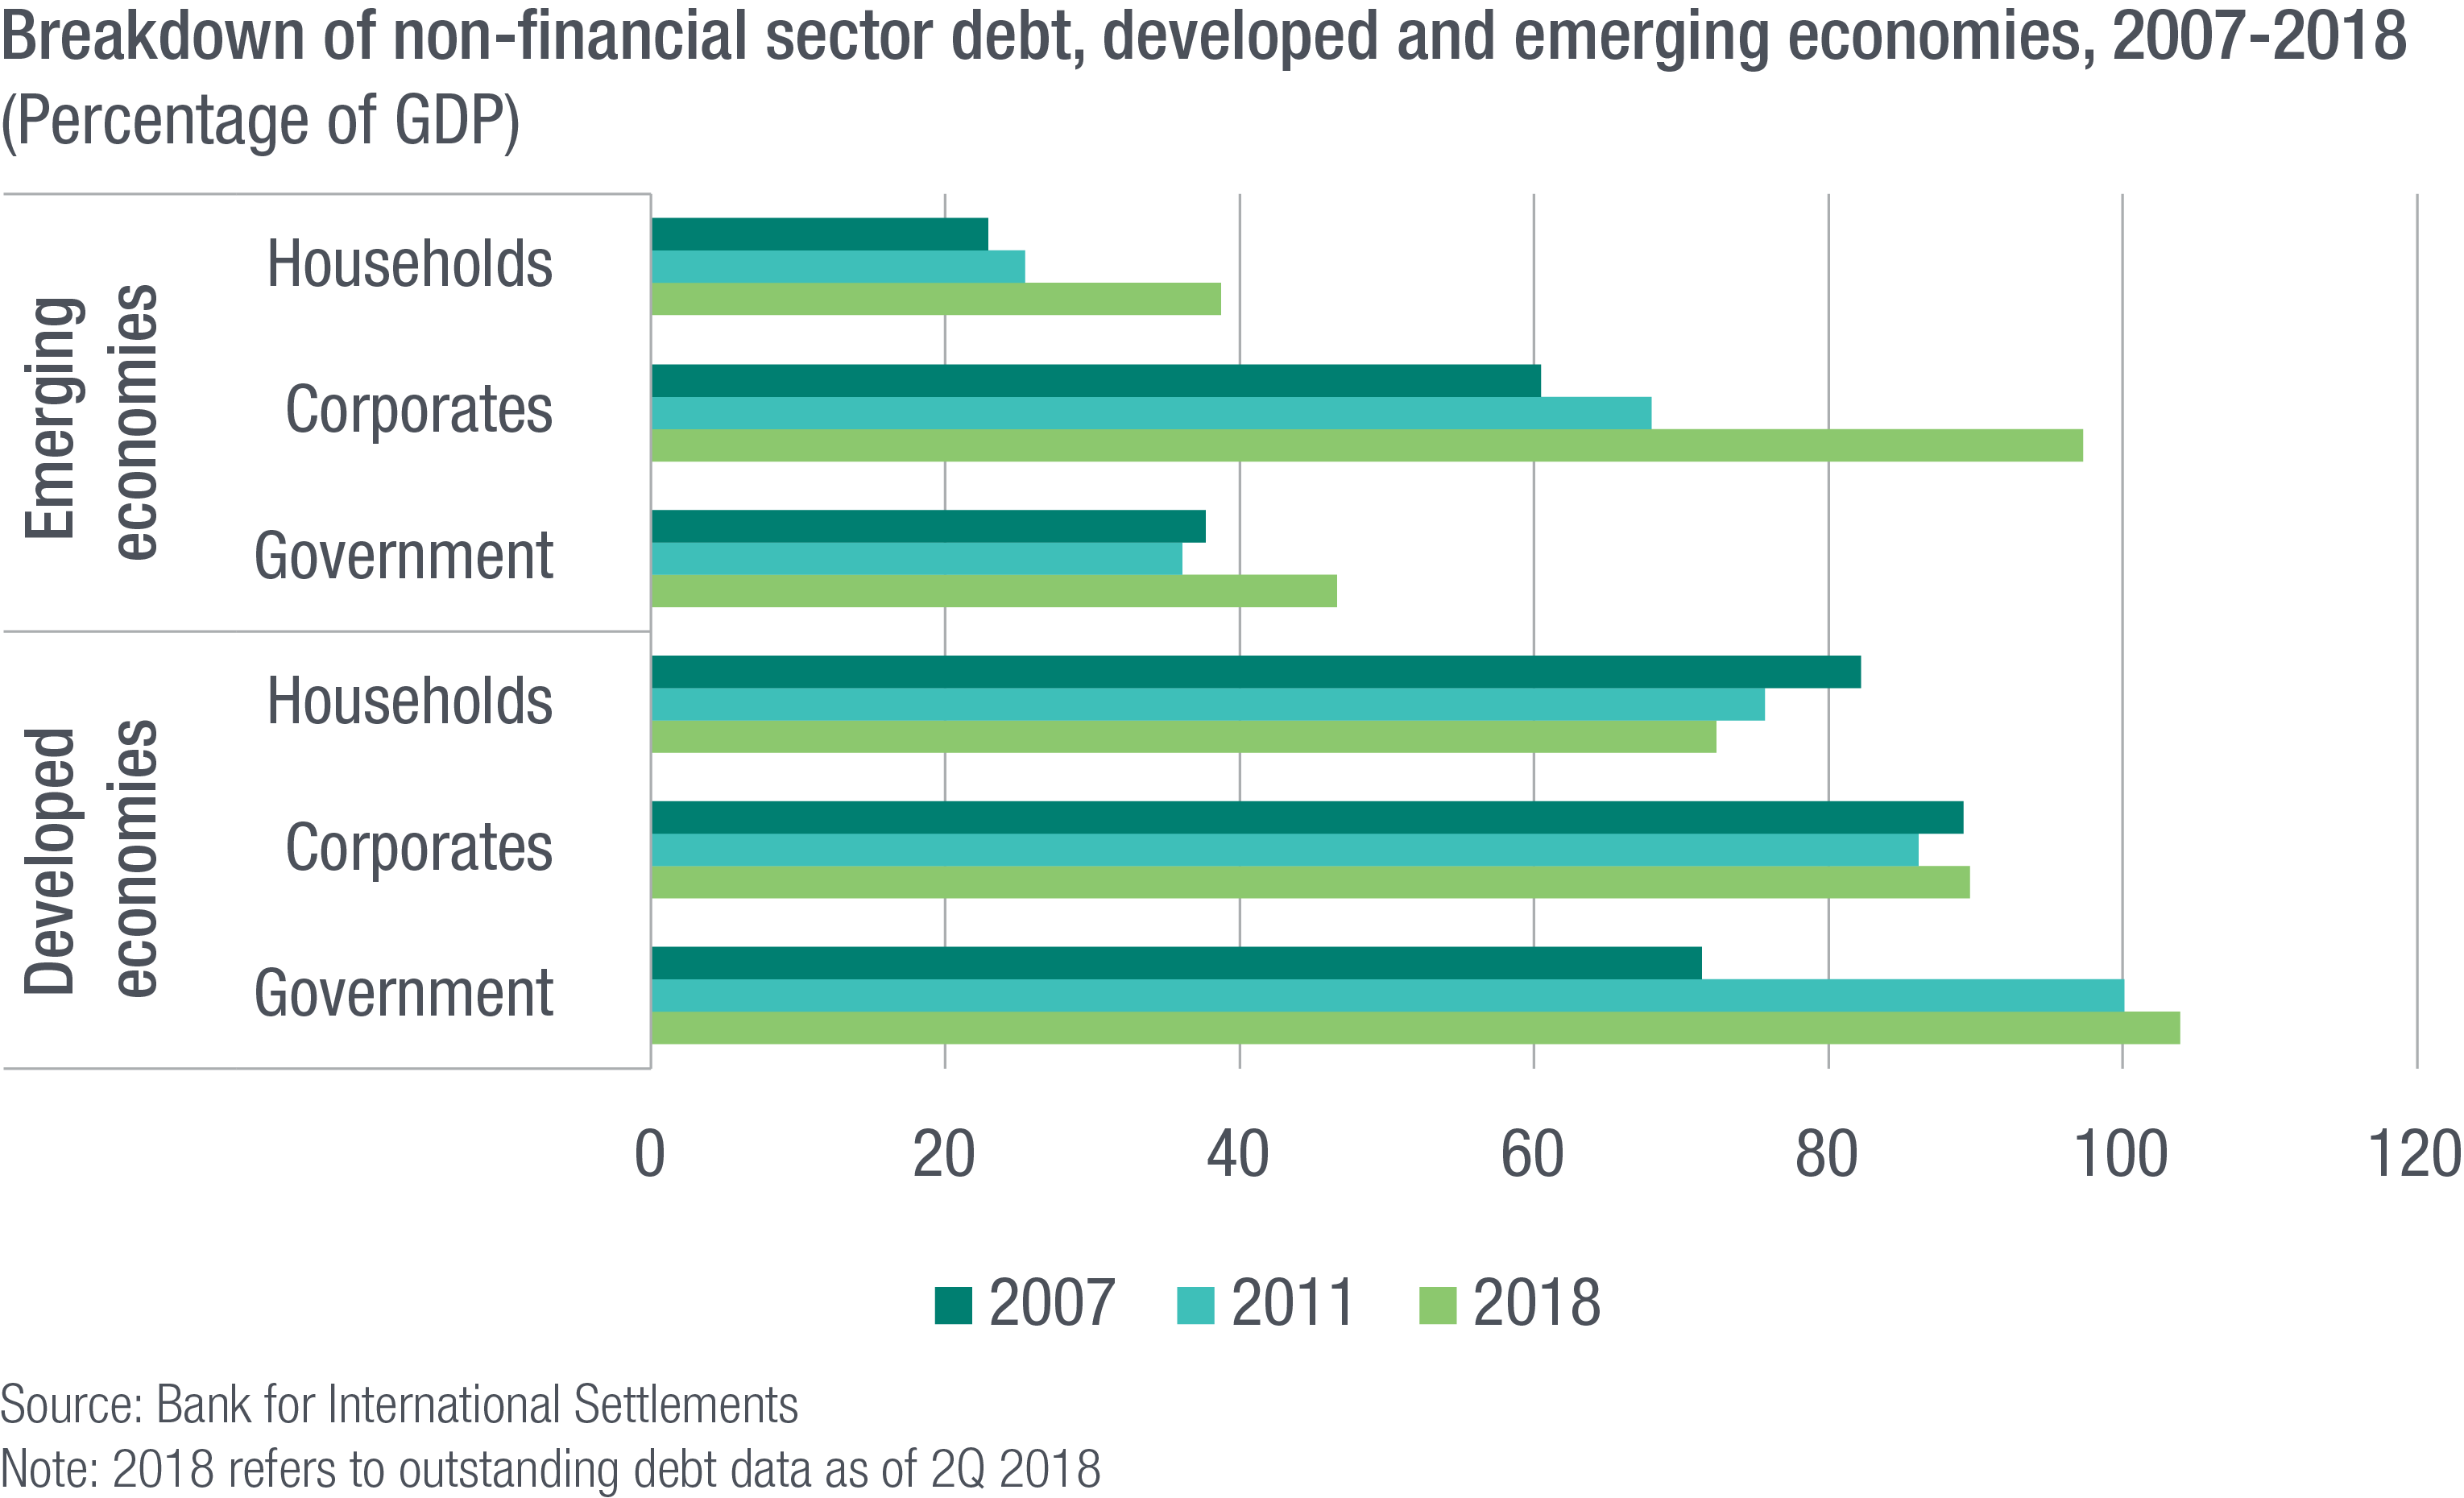 Breakdown of non-financial sector debt, developed and emerging economies, 2007-2018 (percentage of GDP)